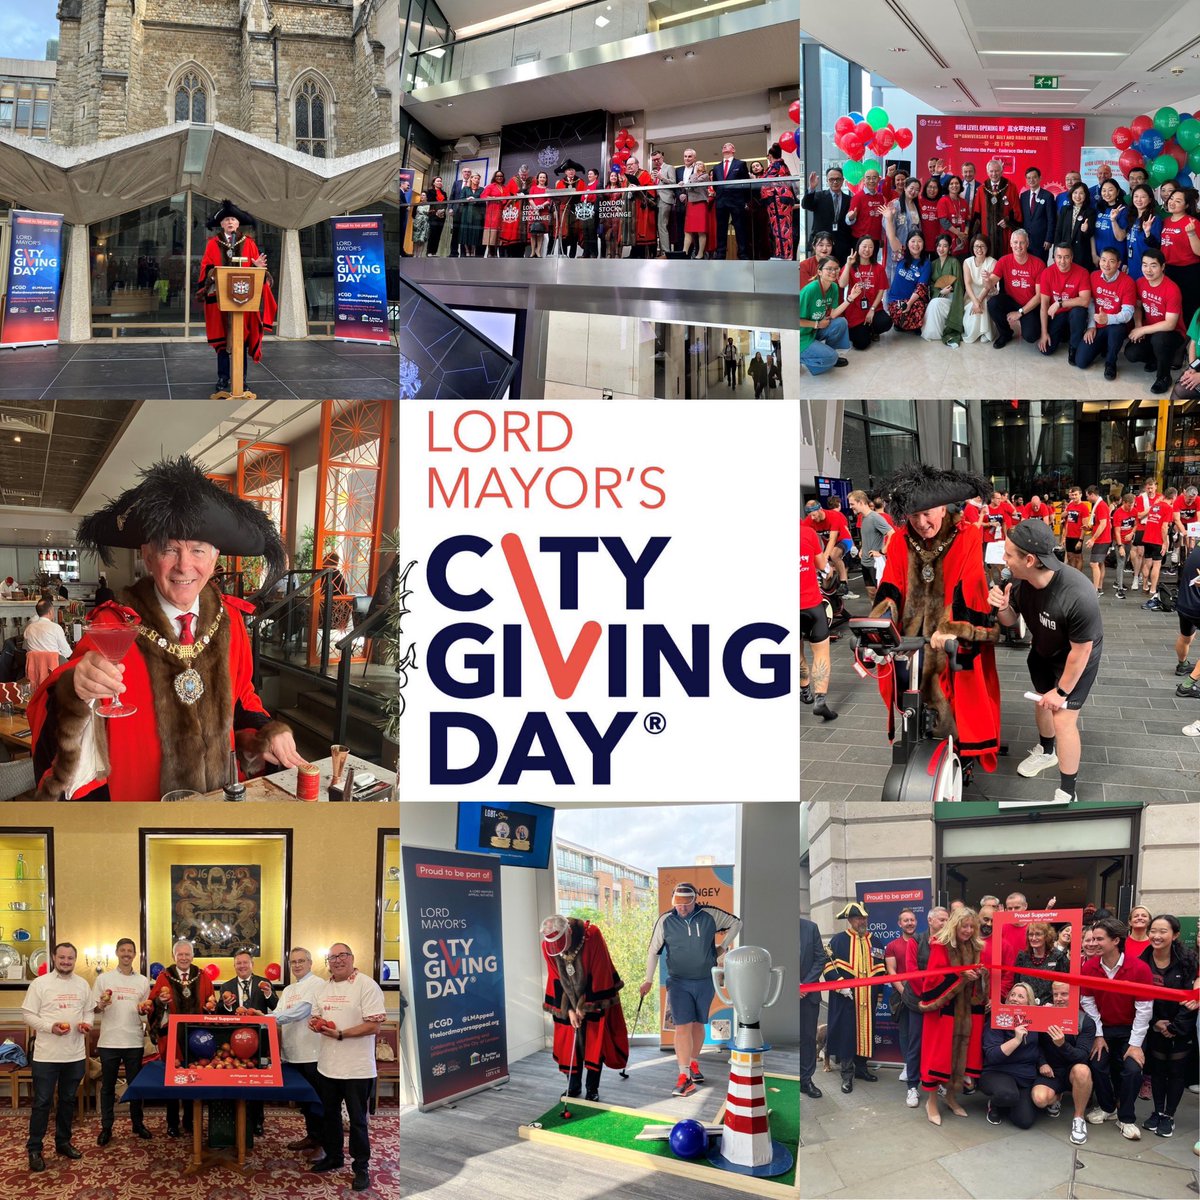 Wonderful to see such active participation in the annual tradition of #CityGivingDay across the Square Mile. Countless volunteer hours and funds donated to charities supporting worthy causes across the UK. Well done to @citylordmayor & the @LMAppeal team 👏🏻🔴